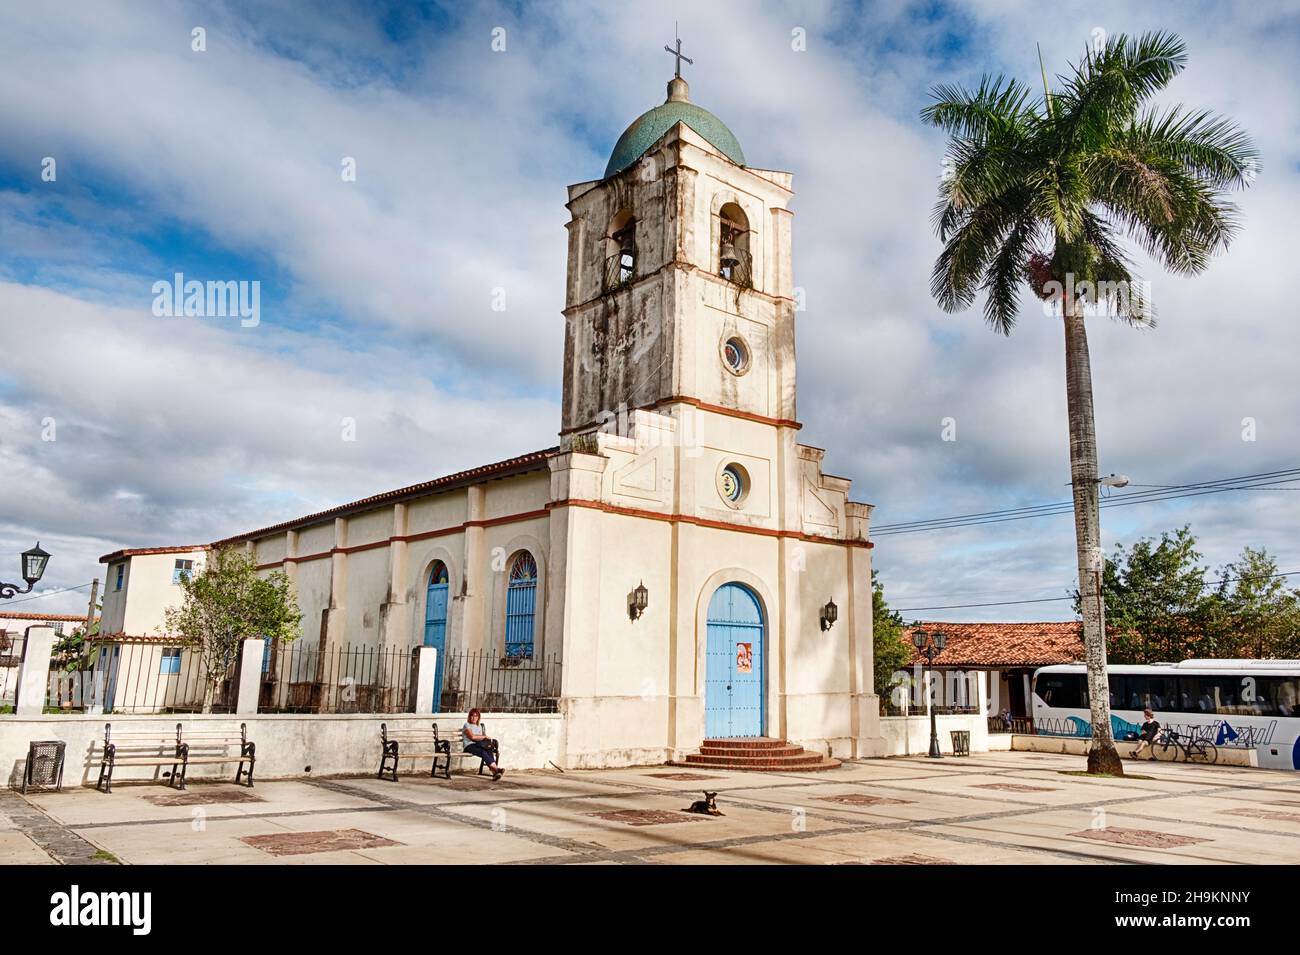 VINALES, CUBA - DECEMBER 25, 2019: On Christmas Day, one anonymous person sits on a bench on the plaza in front of the main church in Vinales, Cuba Stock Photo